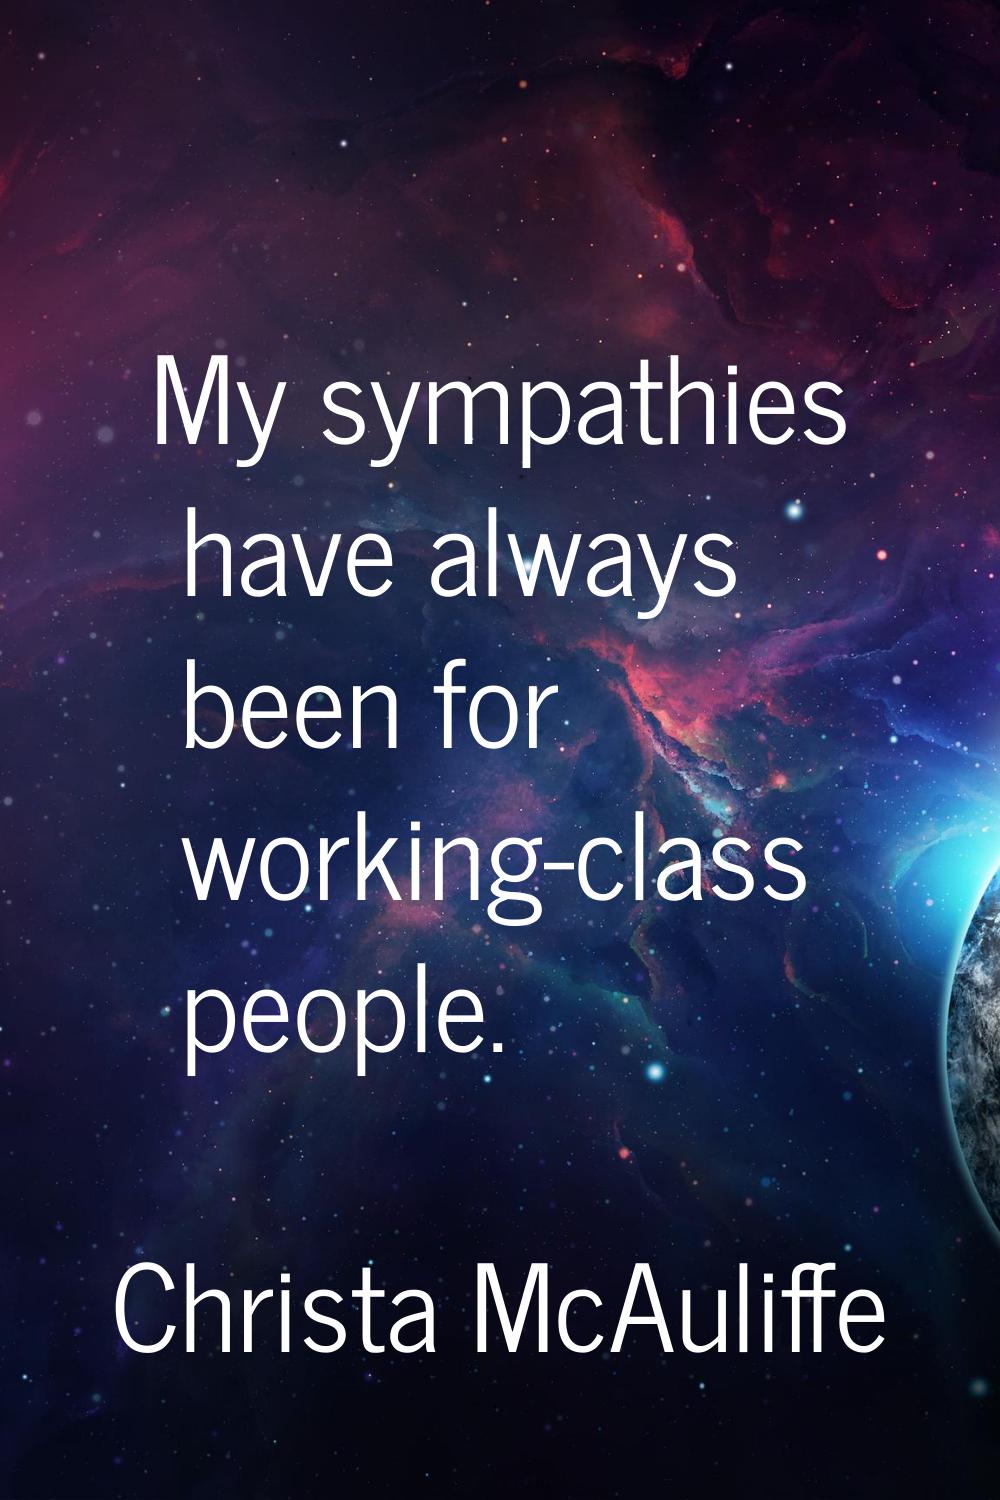 My sympathies have always been for working-class people.